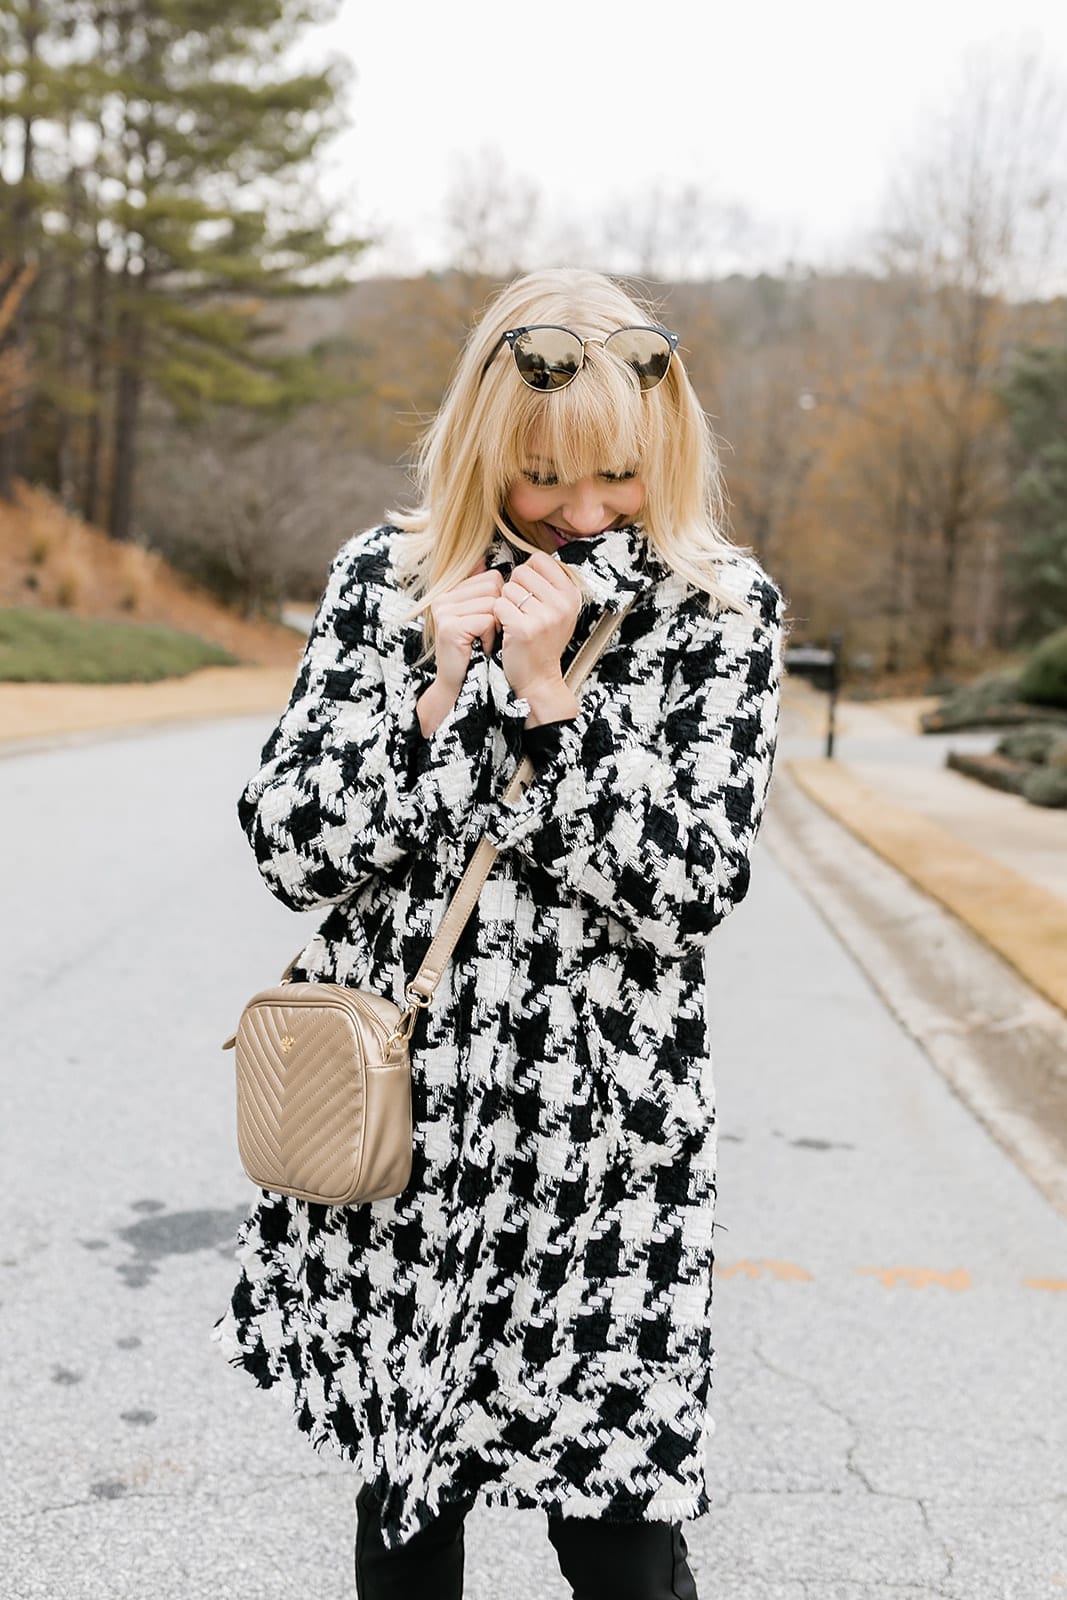 Alice and Olivia Coat - this is the coat that's a bestselling Alice and Olivia must have! I sized down. Alabama fans who love houndstooth, get this before it sells out!